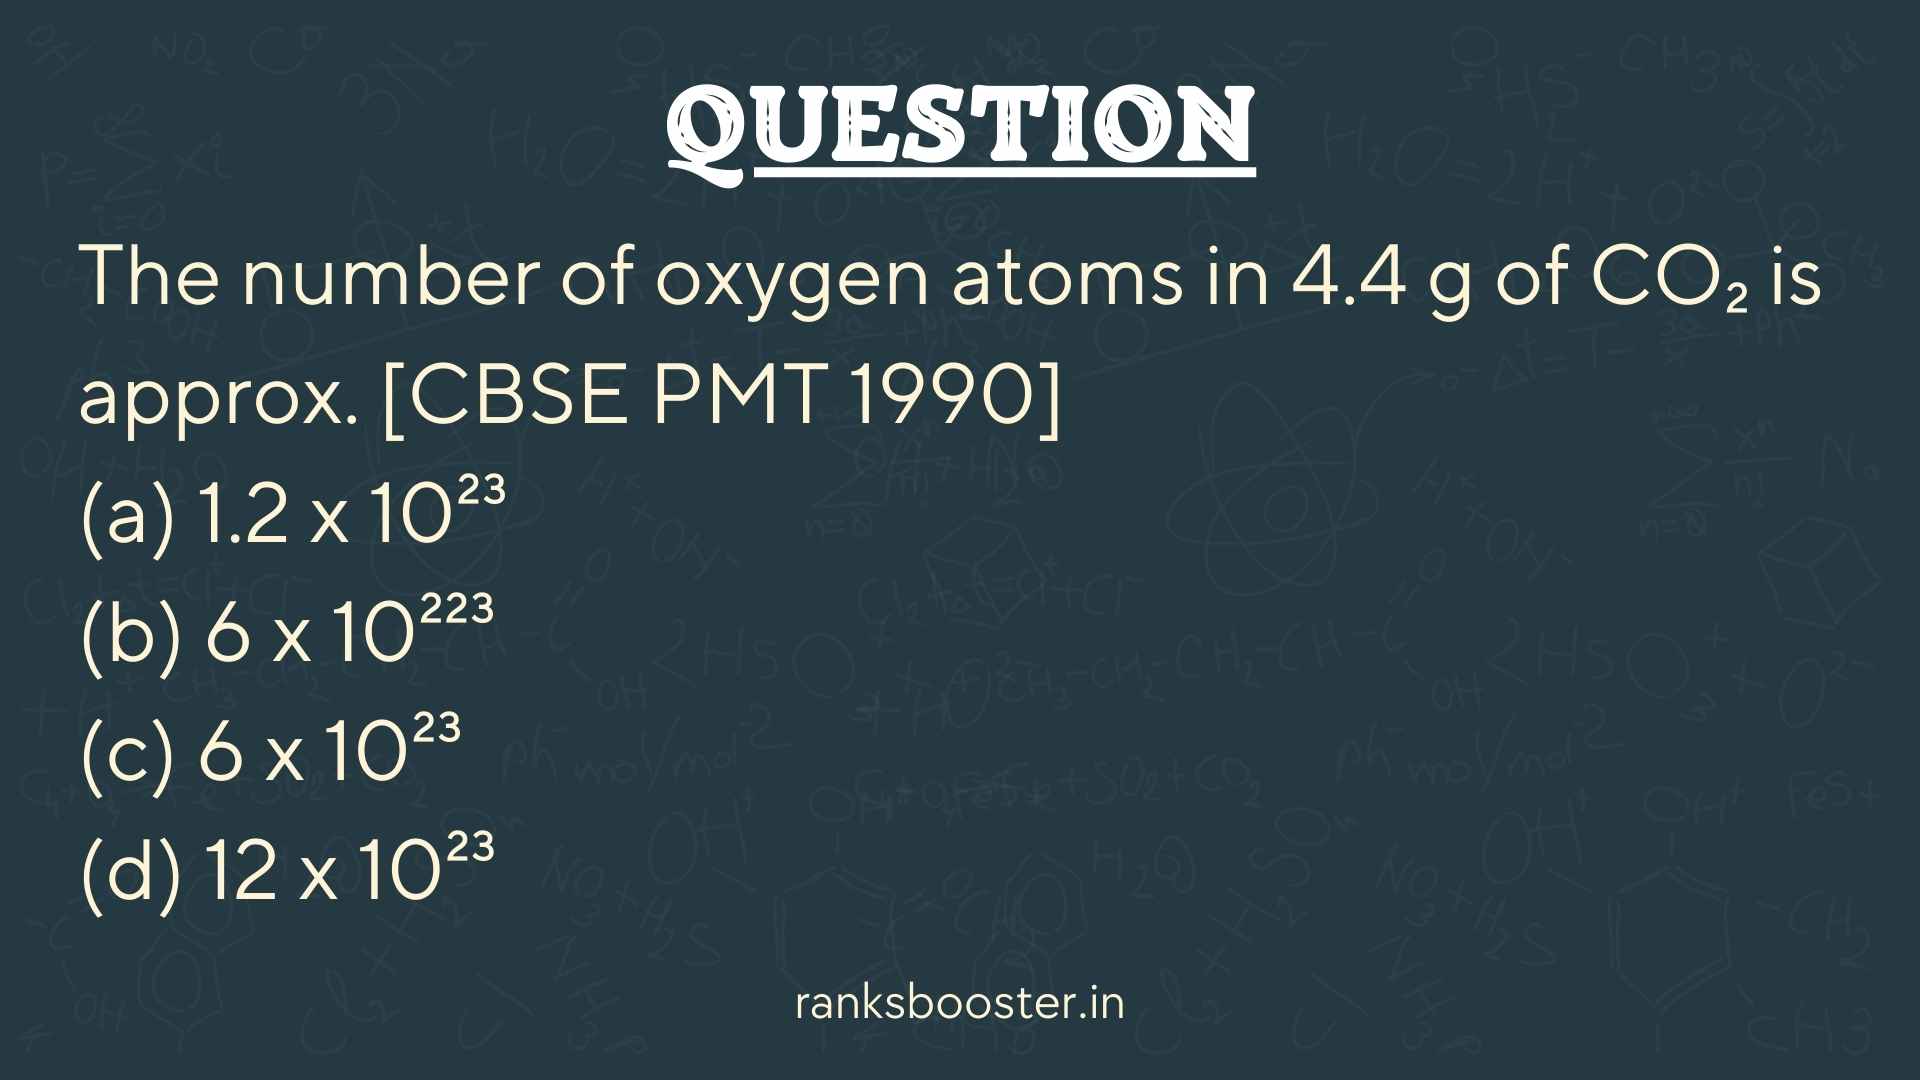 The number of oxygen atoms in 4.4 g of CO₂ is approx. [CBSE PMT 1990] (a) 1.2 x 10²³ (b) 6 x 10²²³ (c) 6 x 10²³ (d) 12 x 10²³